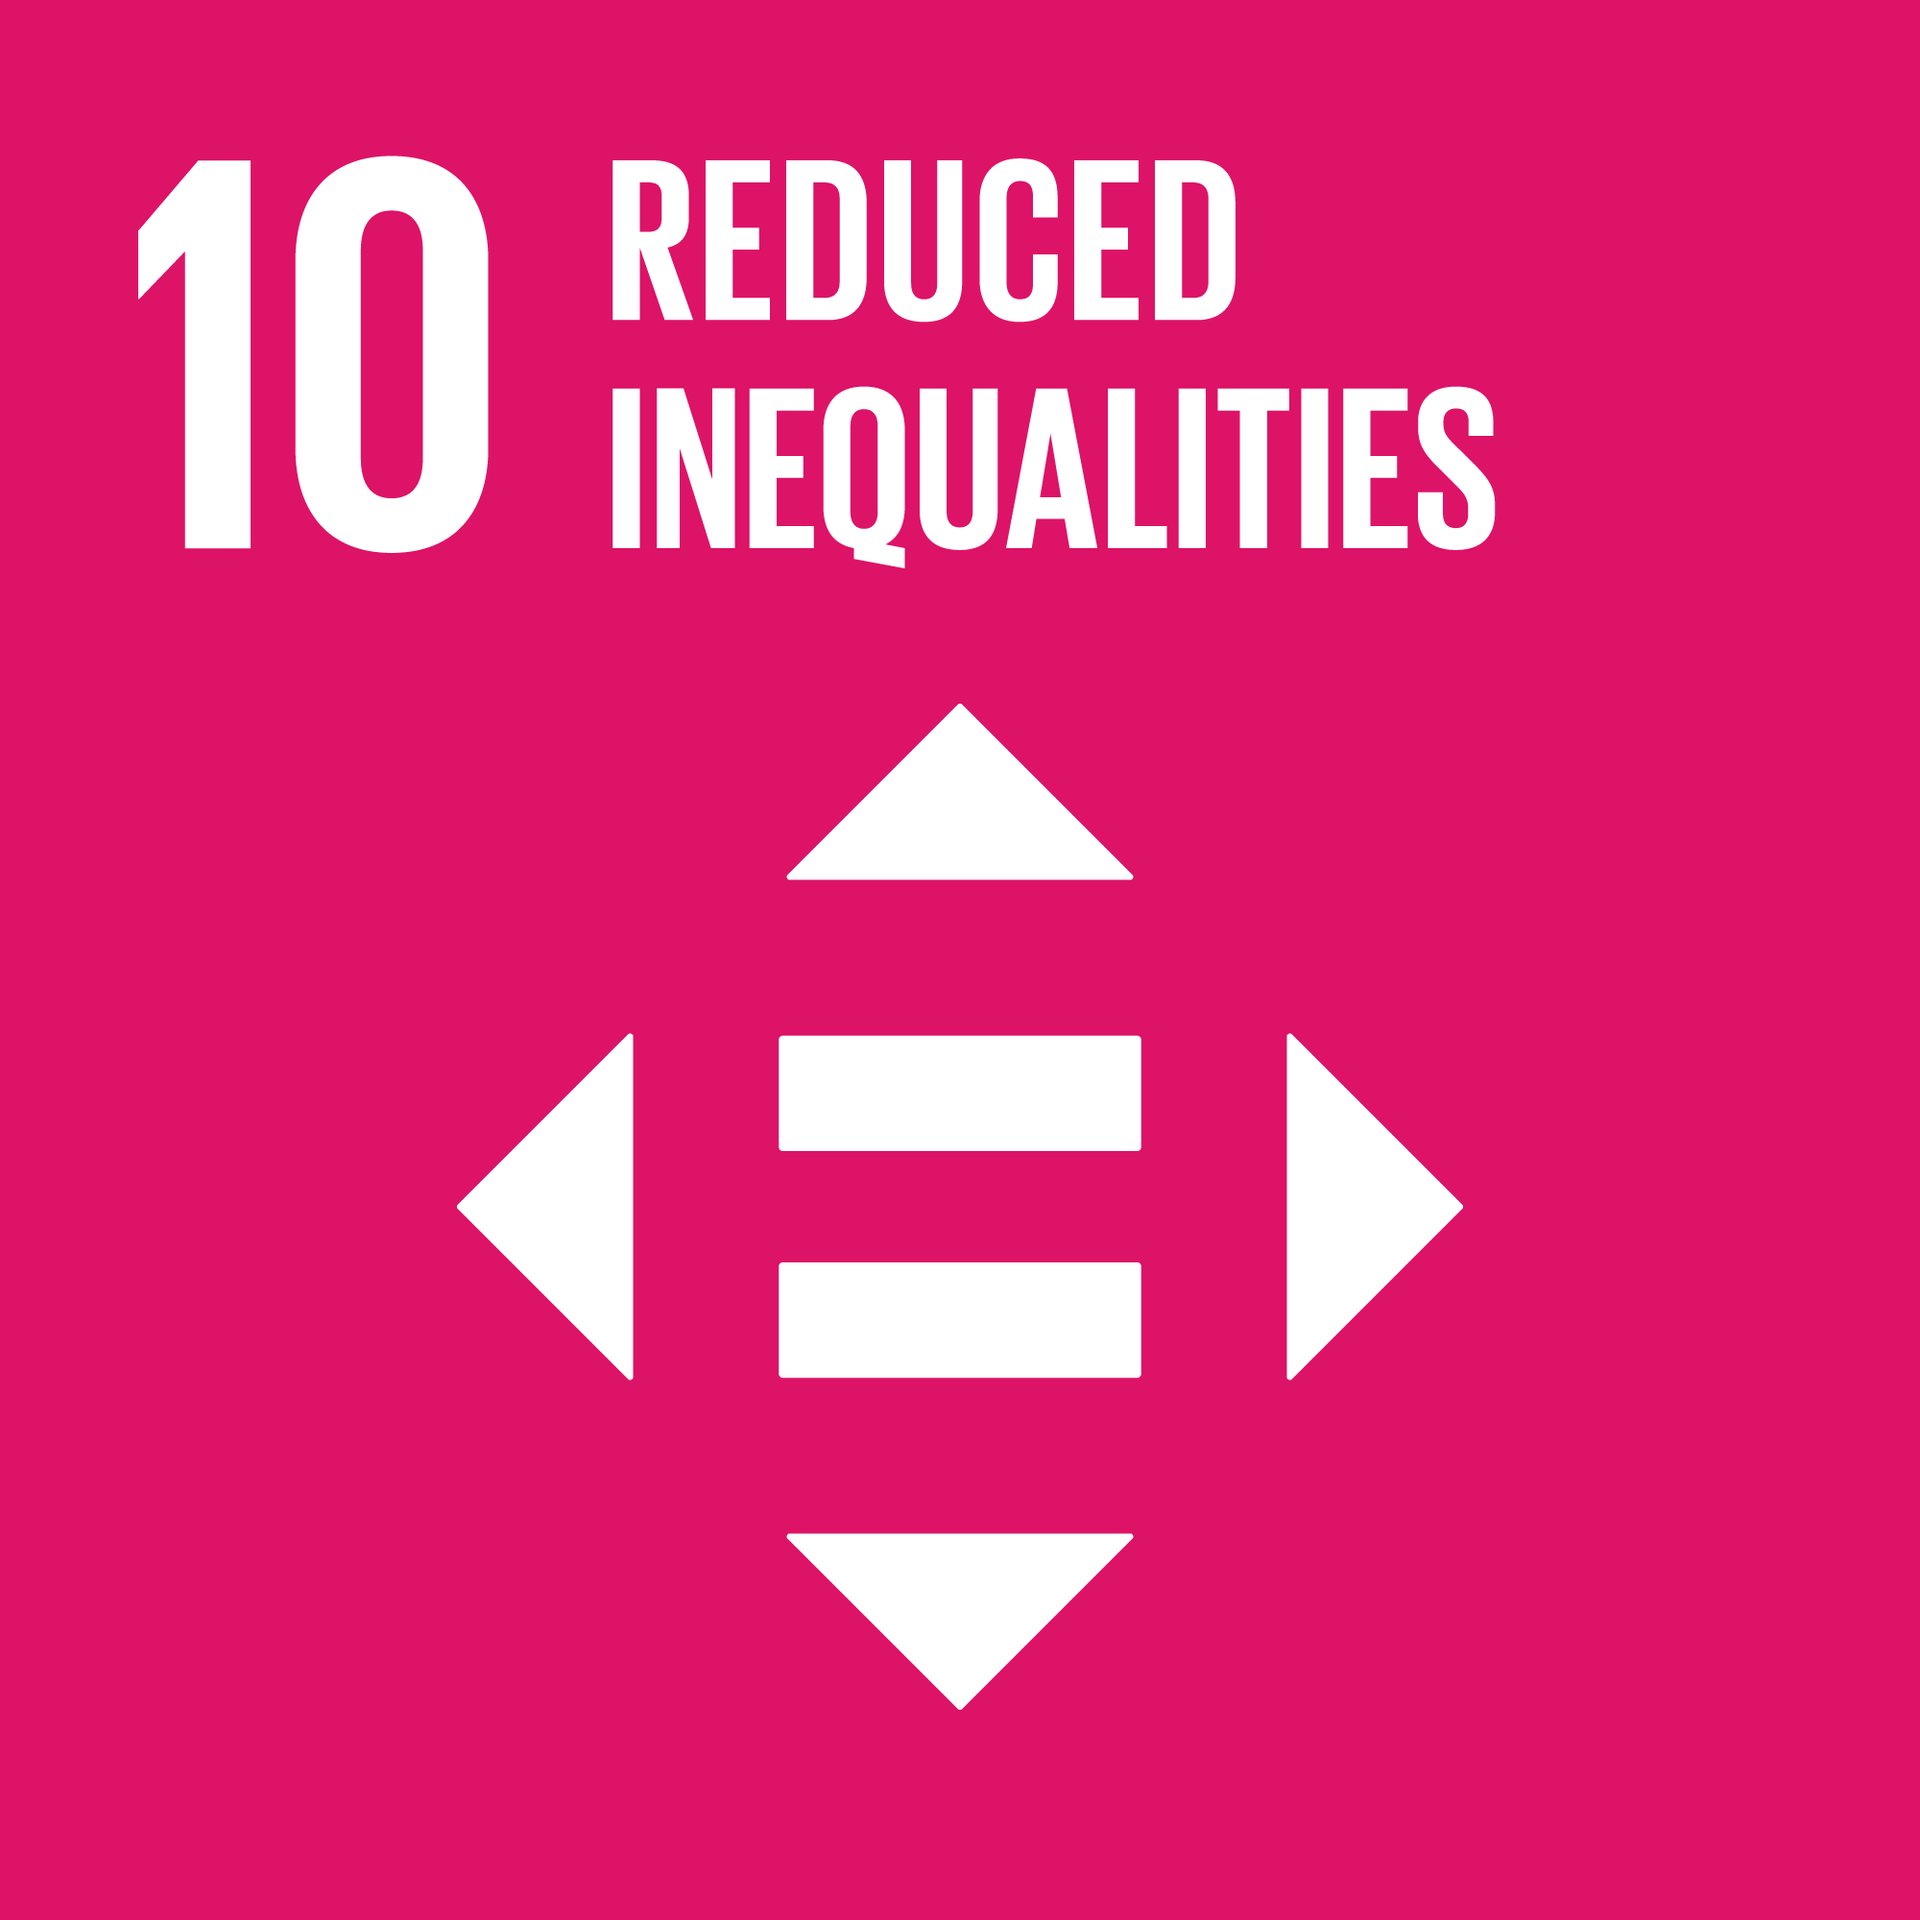 A pink background with the words `` reduced inequalities '' written on it.